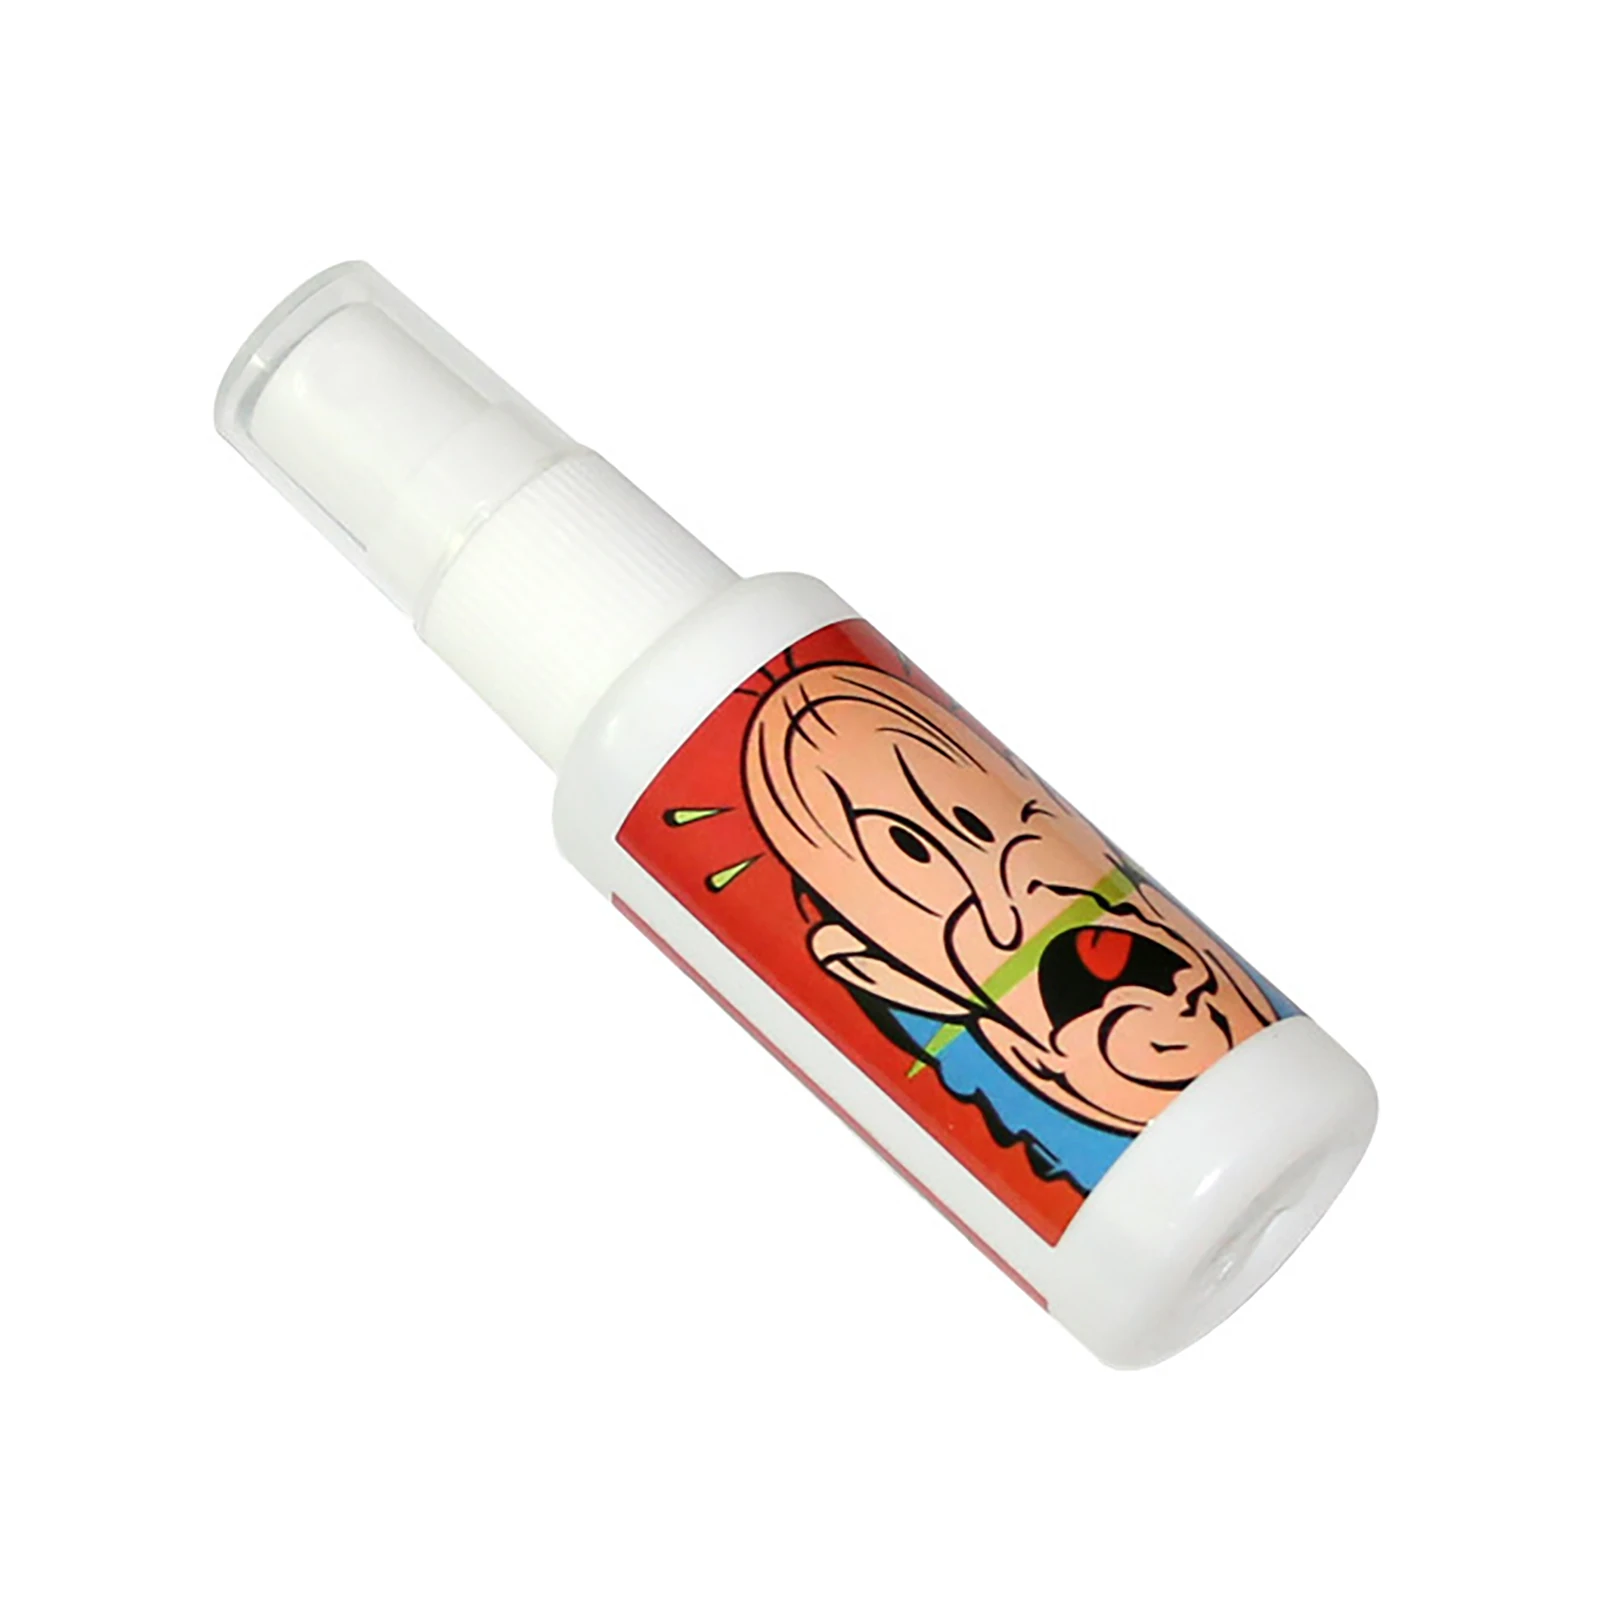 Liquid Fart Prank Safe and Harmless Smelling Spray Tricky Props Easy to Use Prank Stuff and Joke Toys for Adults or Kids